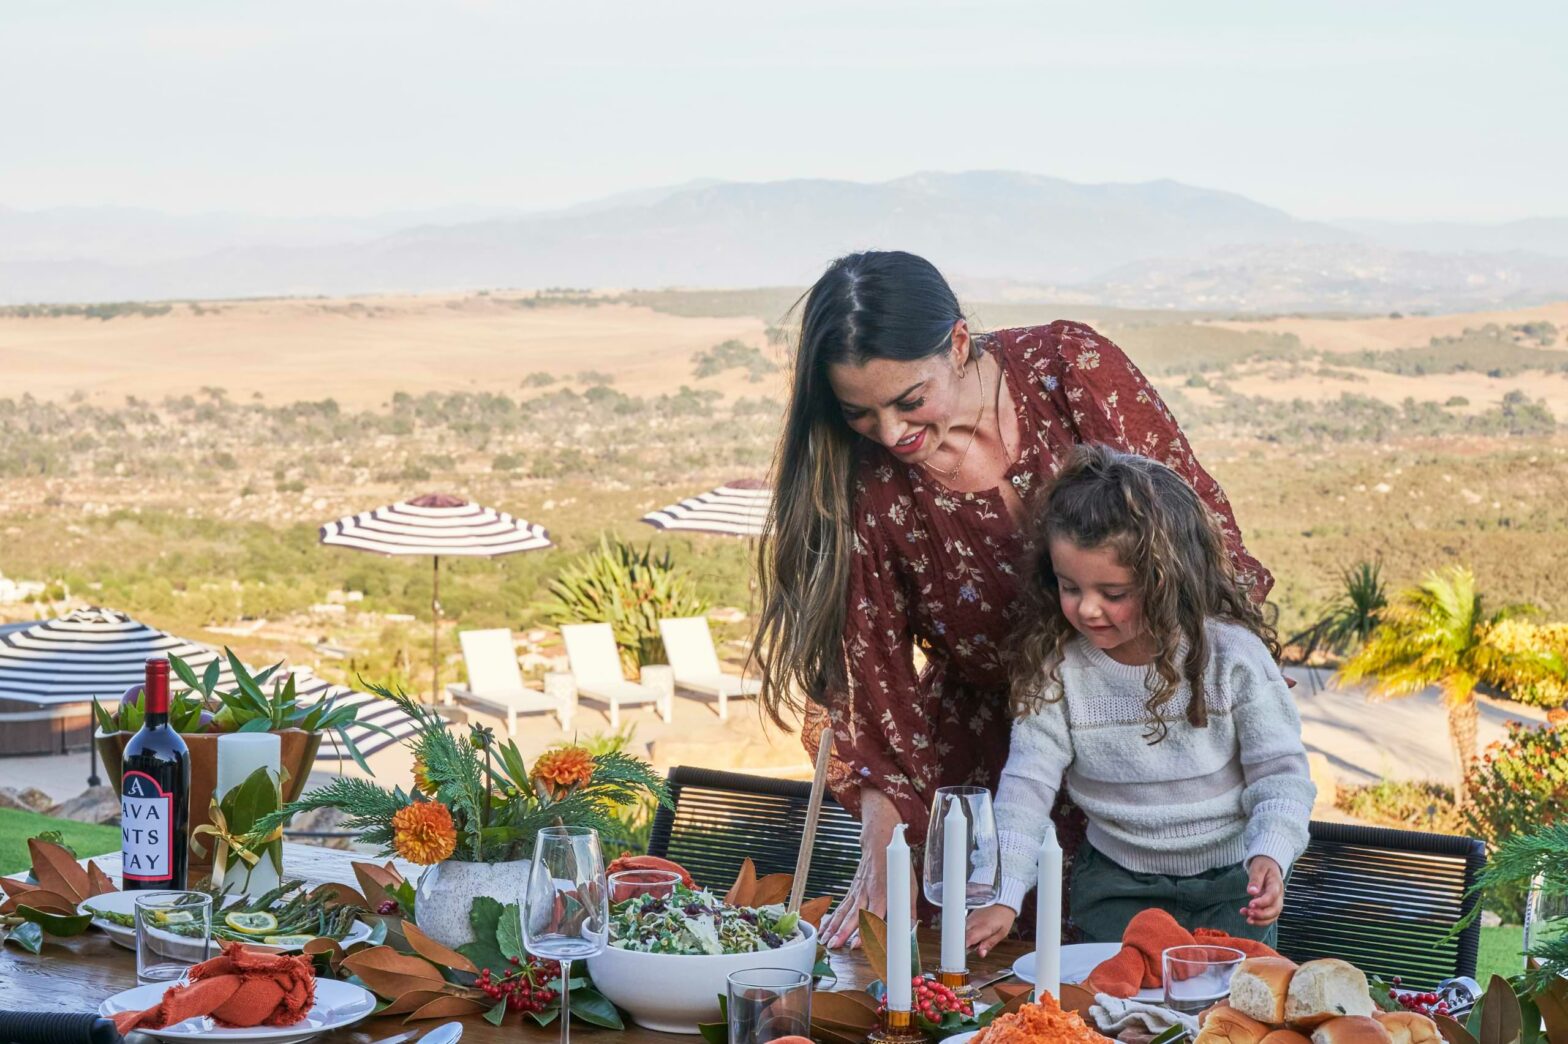 A mother a daughter set a decorated table with fall decor and utensils. In the background, pool chairs and sun umbrellas sit atop a mountain with desert and mountains in the far distance.